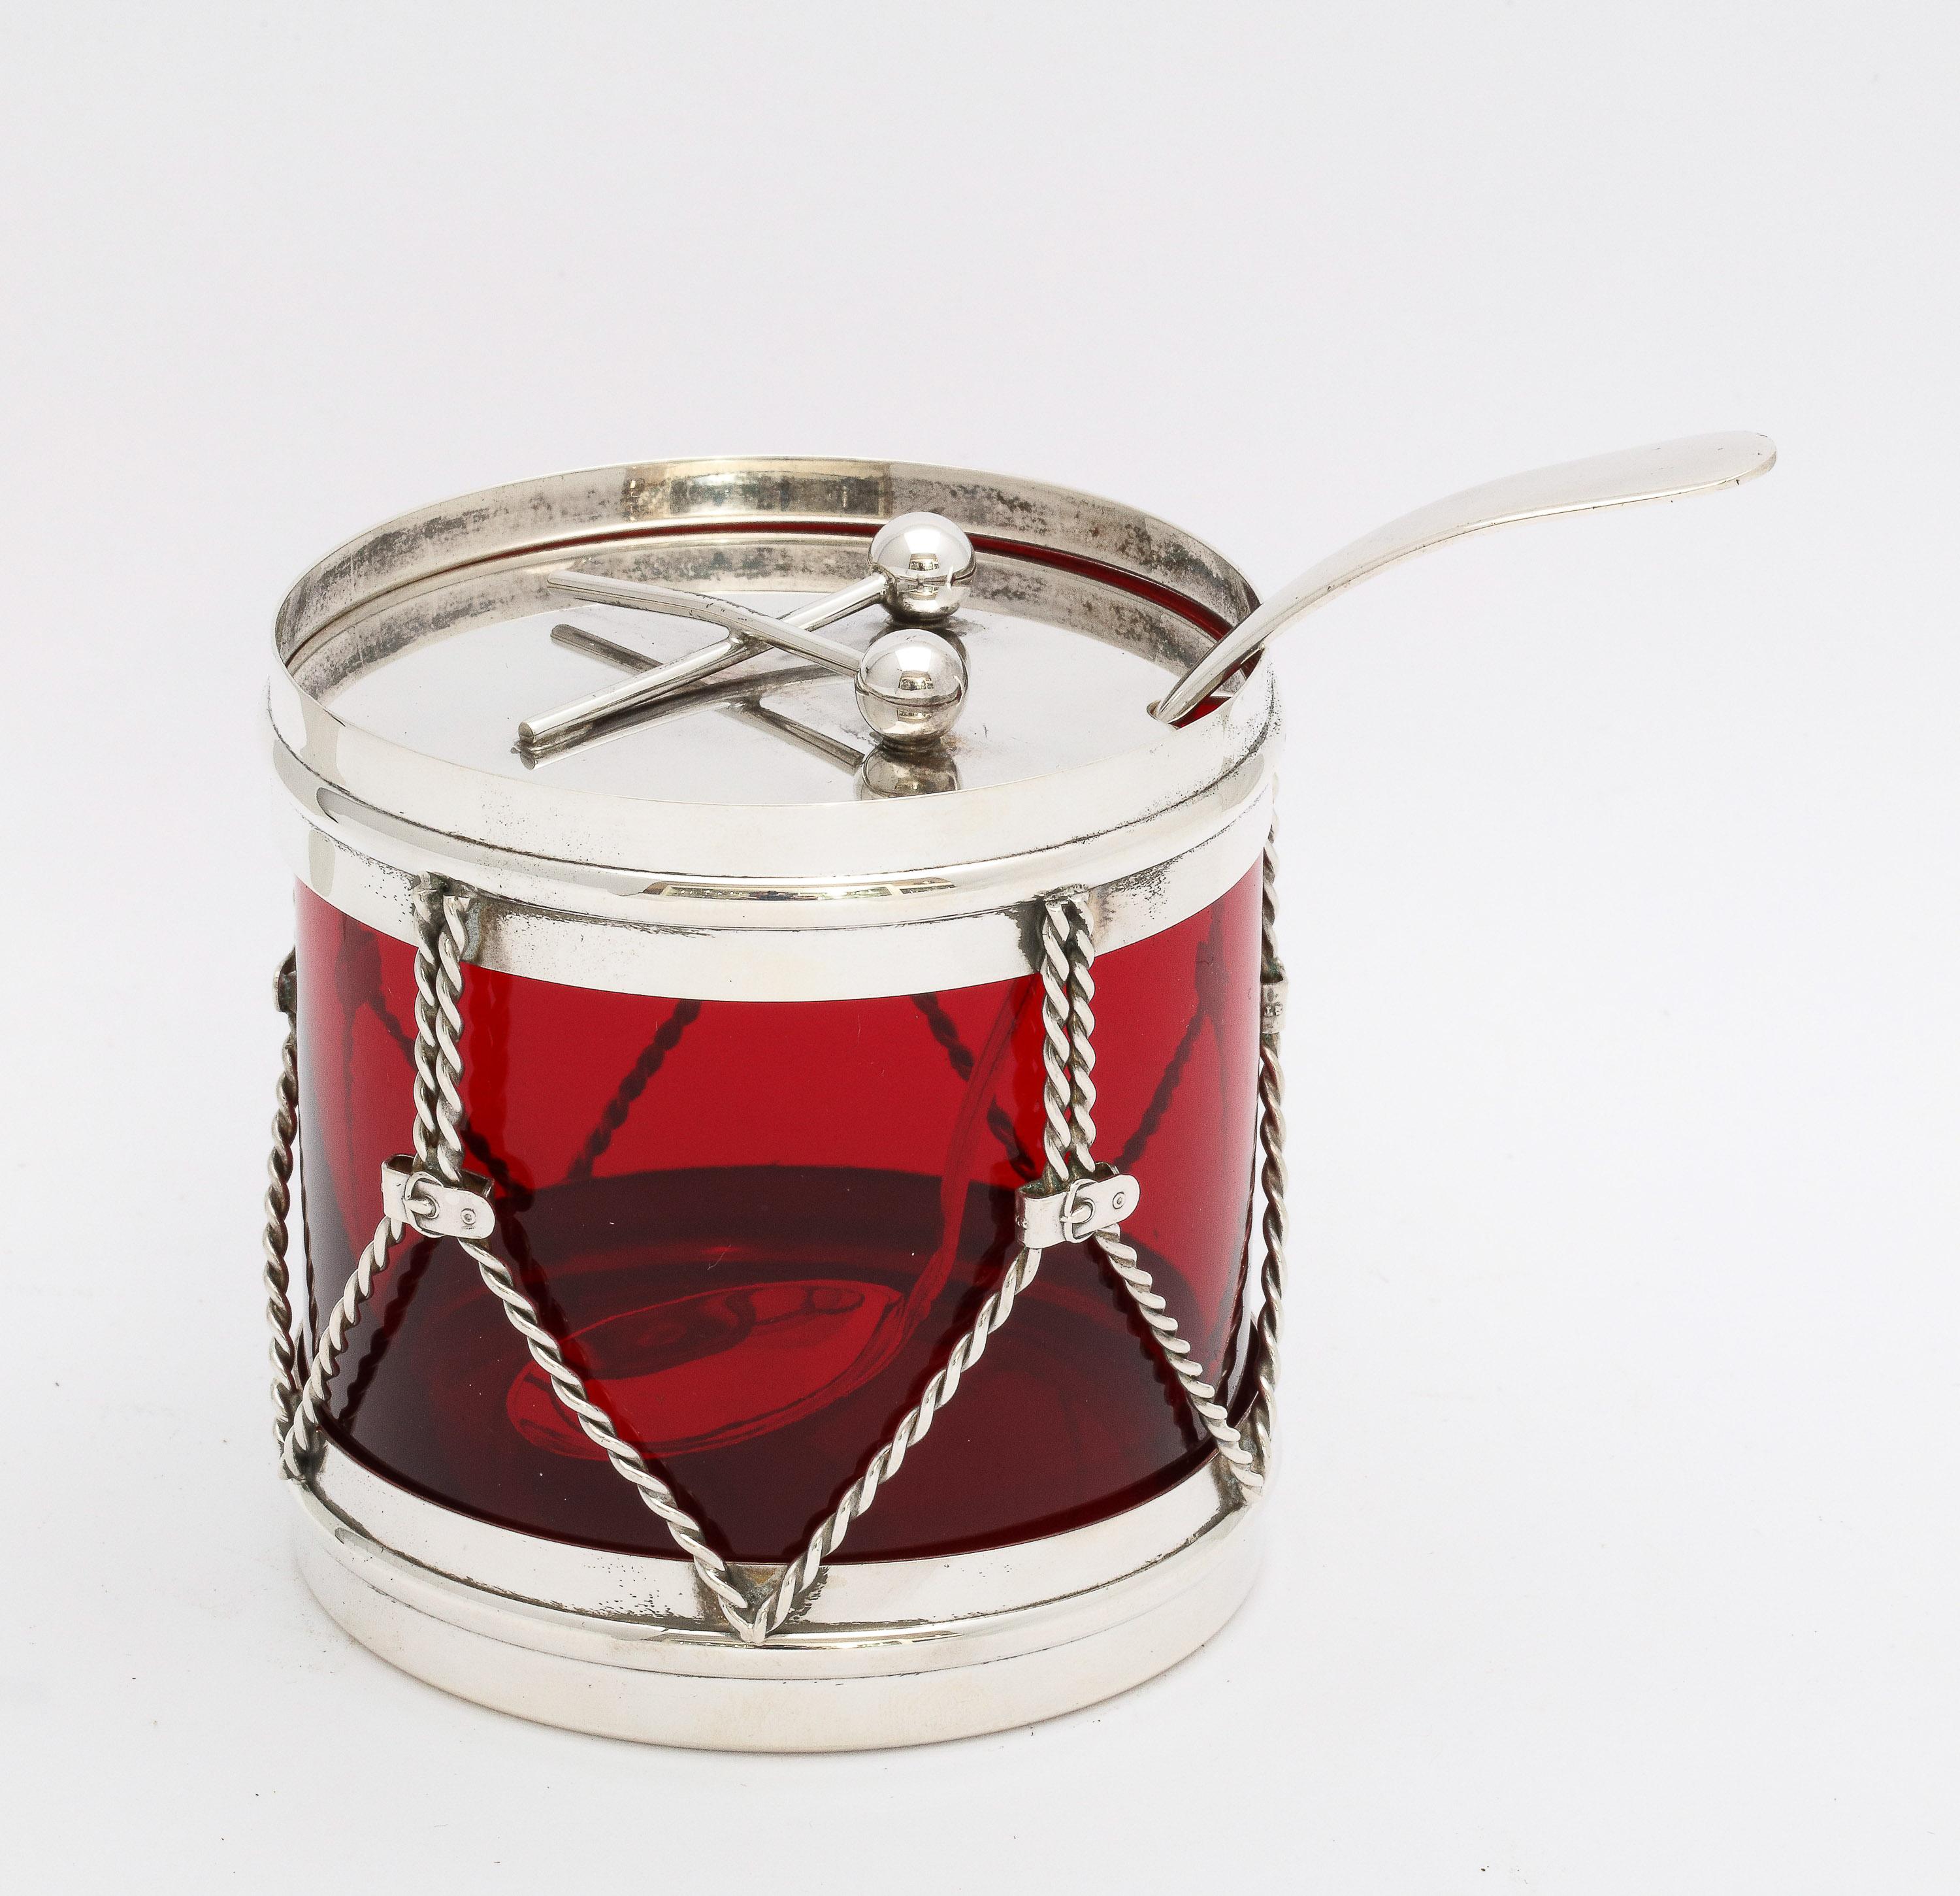 Art Deco period, sterling silver and ruby glass, drum-form condiments jar with original sterling silver spoon, R. Blackinton and Co., No. Attleboro, Mass., Ca. 1930's. Measures 3 1/8 inches high x 3 1/4 inches diameter. Sterling silver spoon